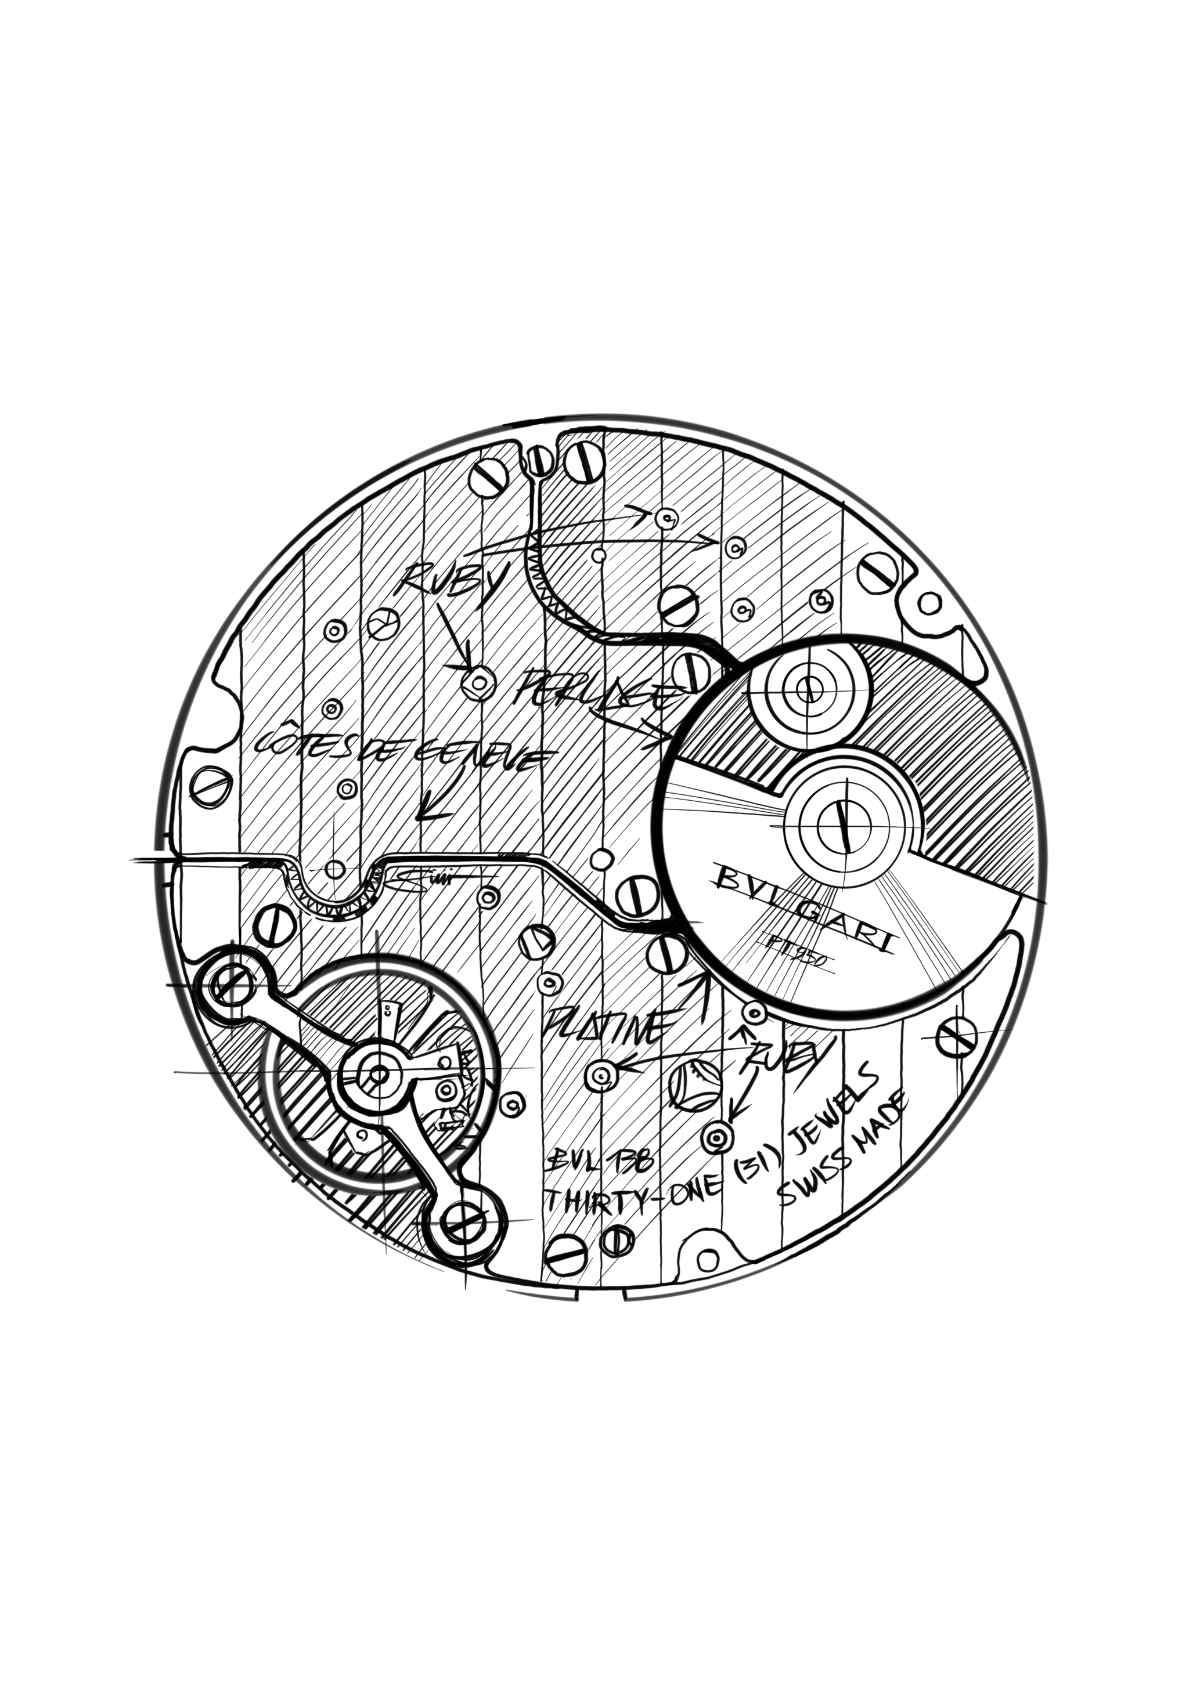 The New Bulgari's Octo Finissimo Sketch Watch: The Art Of Drawing